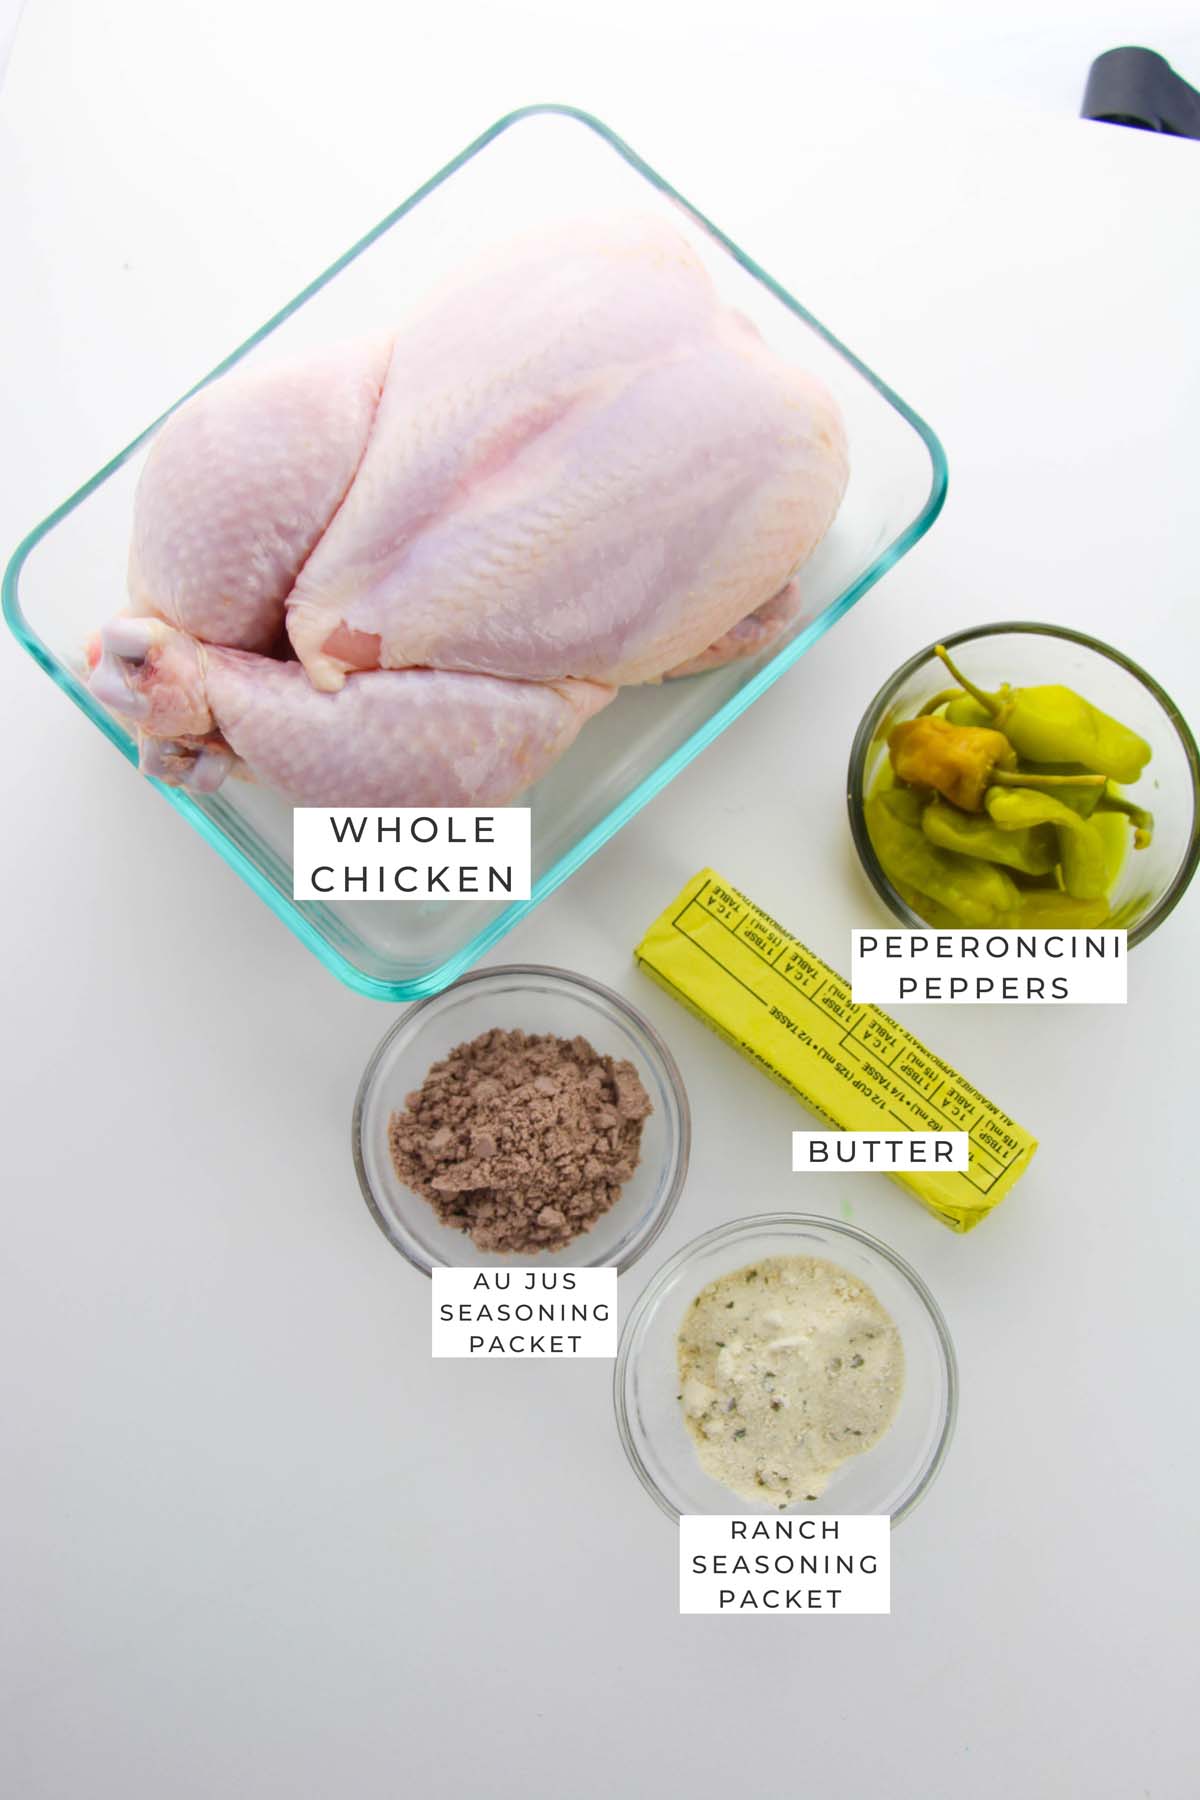 Labeled ingredients for the Mississippi chicken.